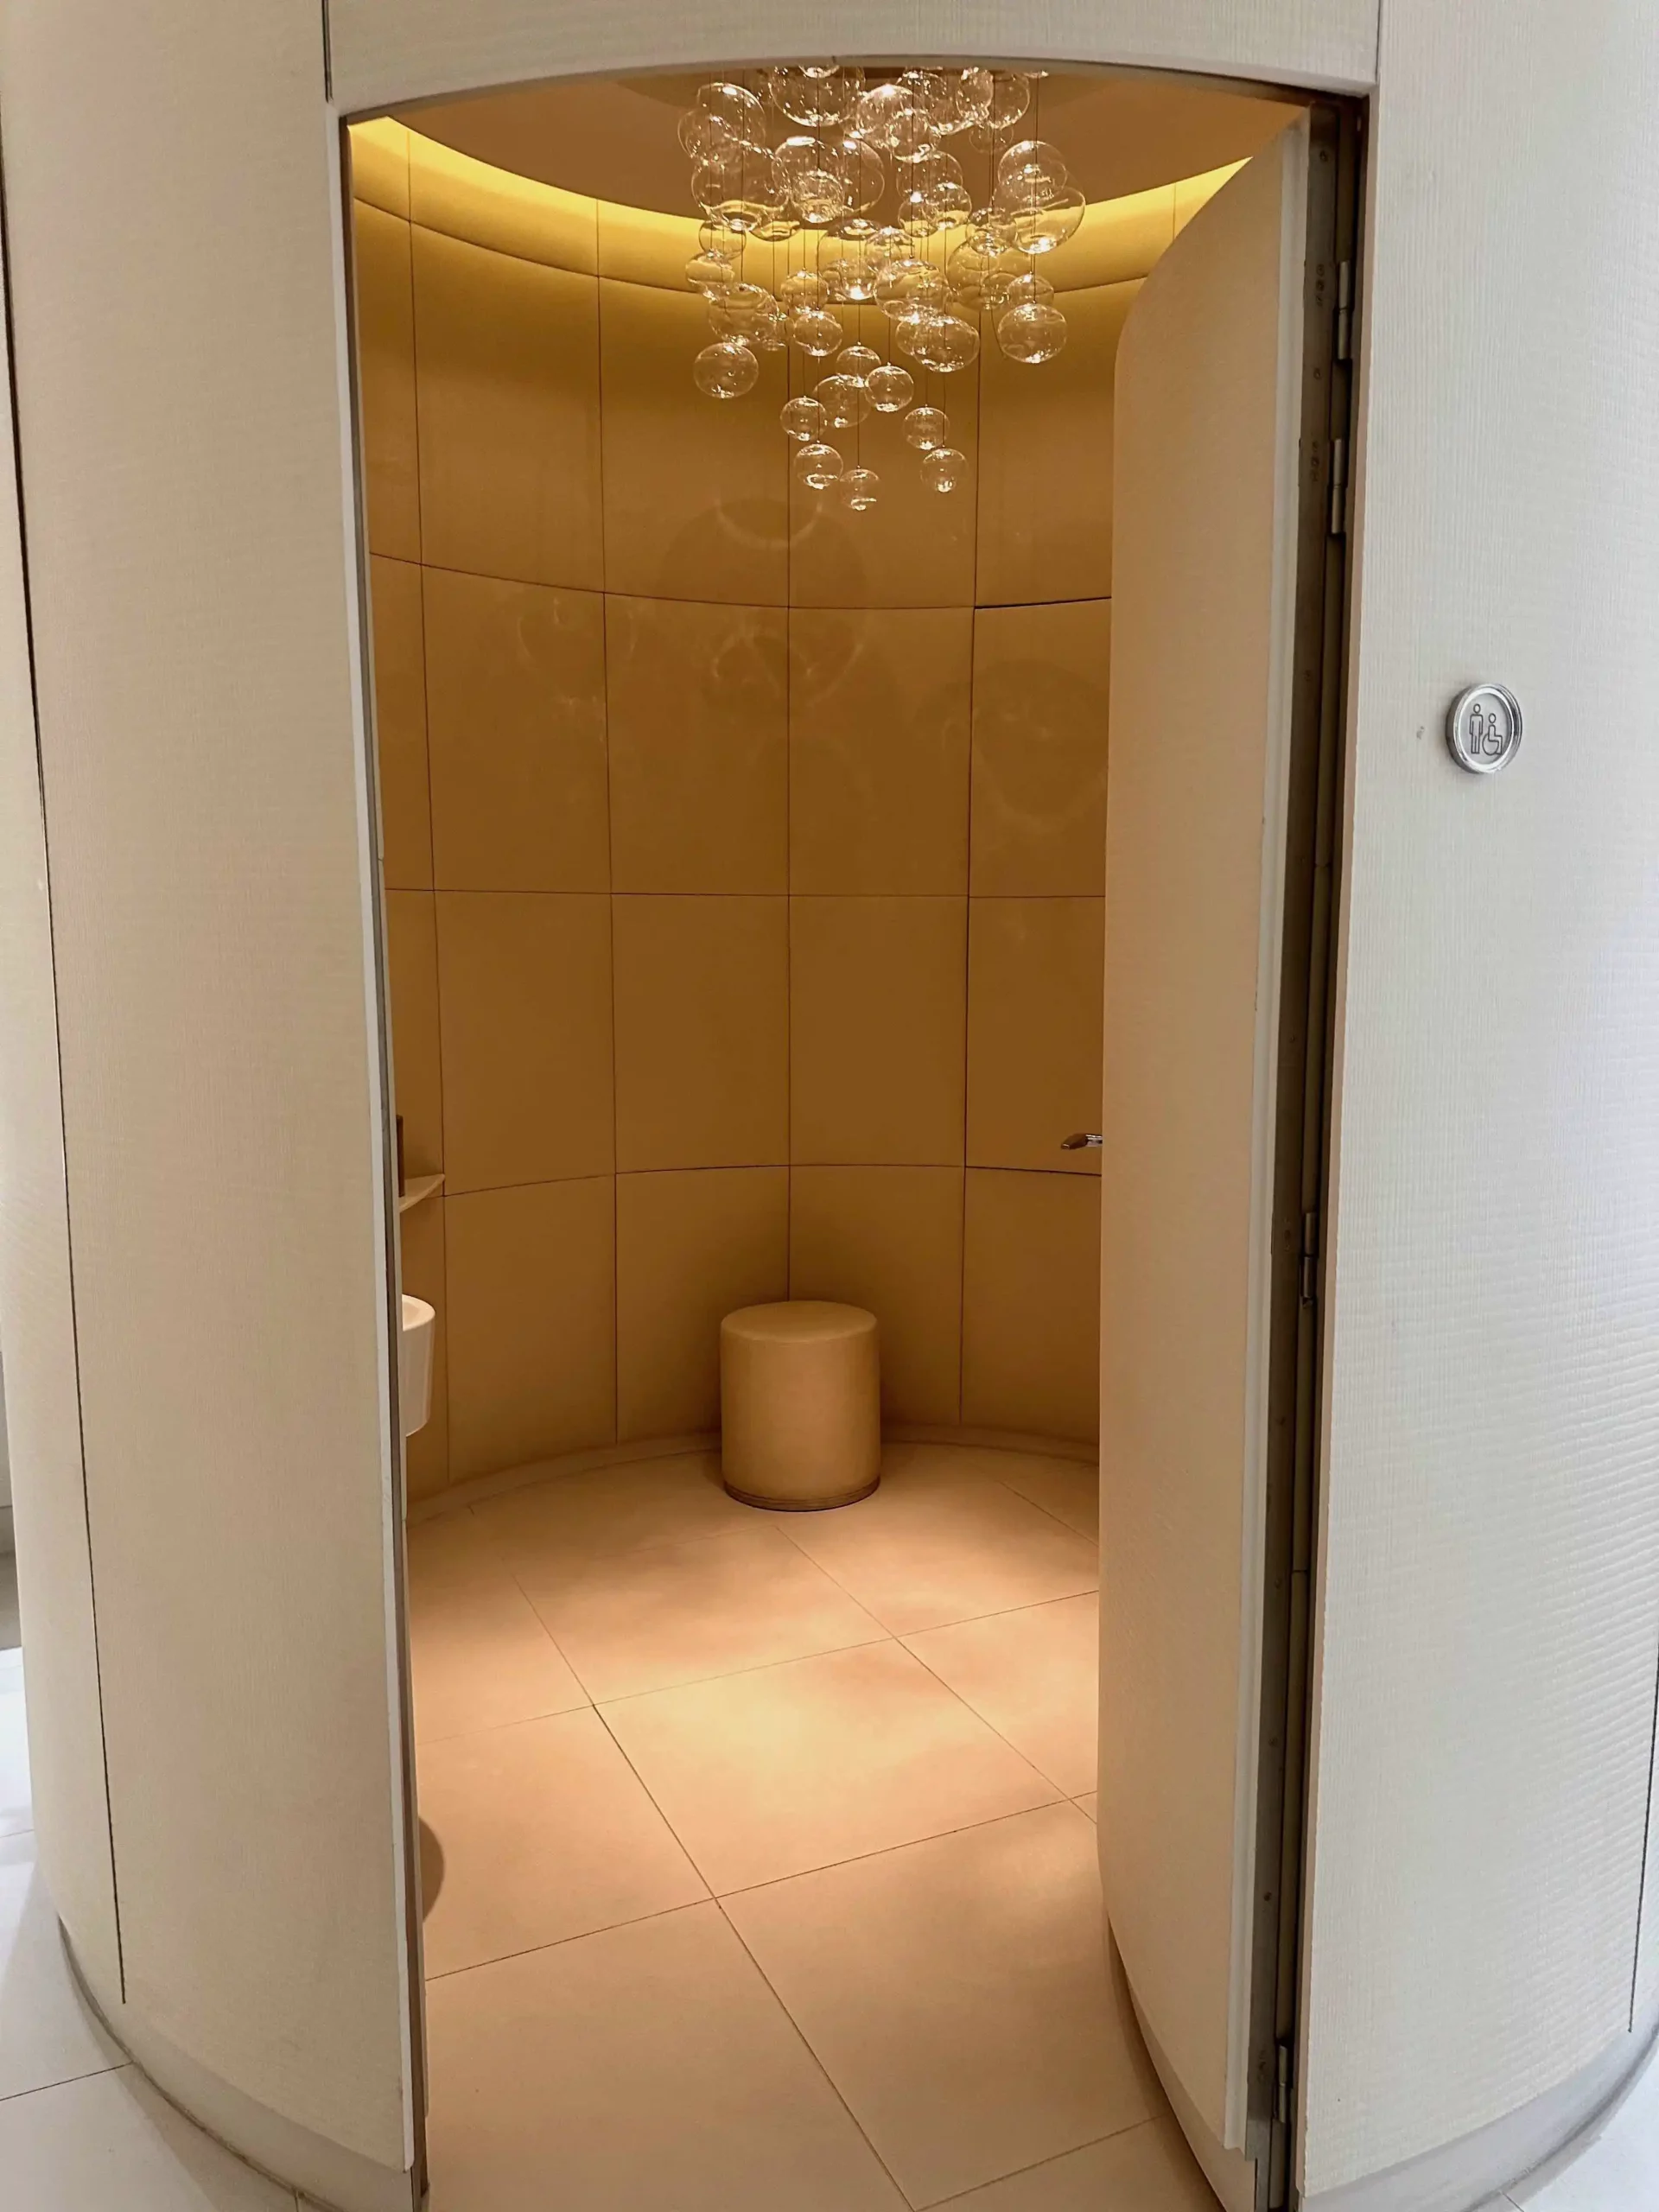 a bathroom with a round object